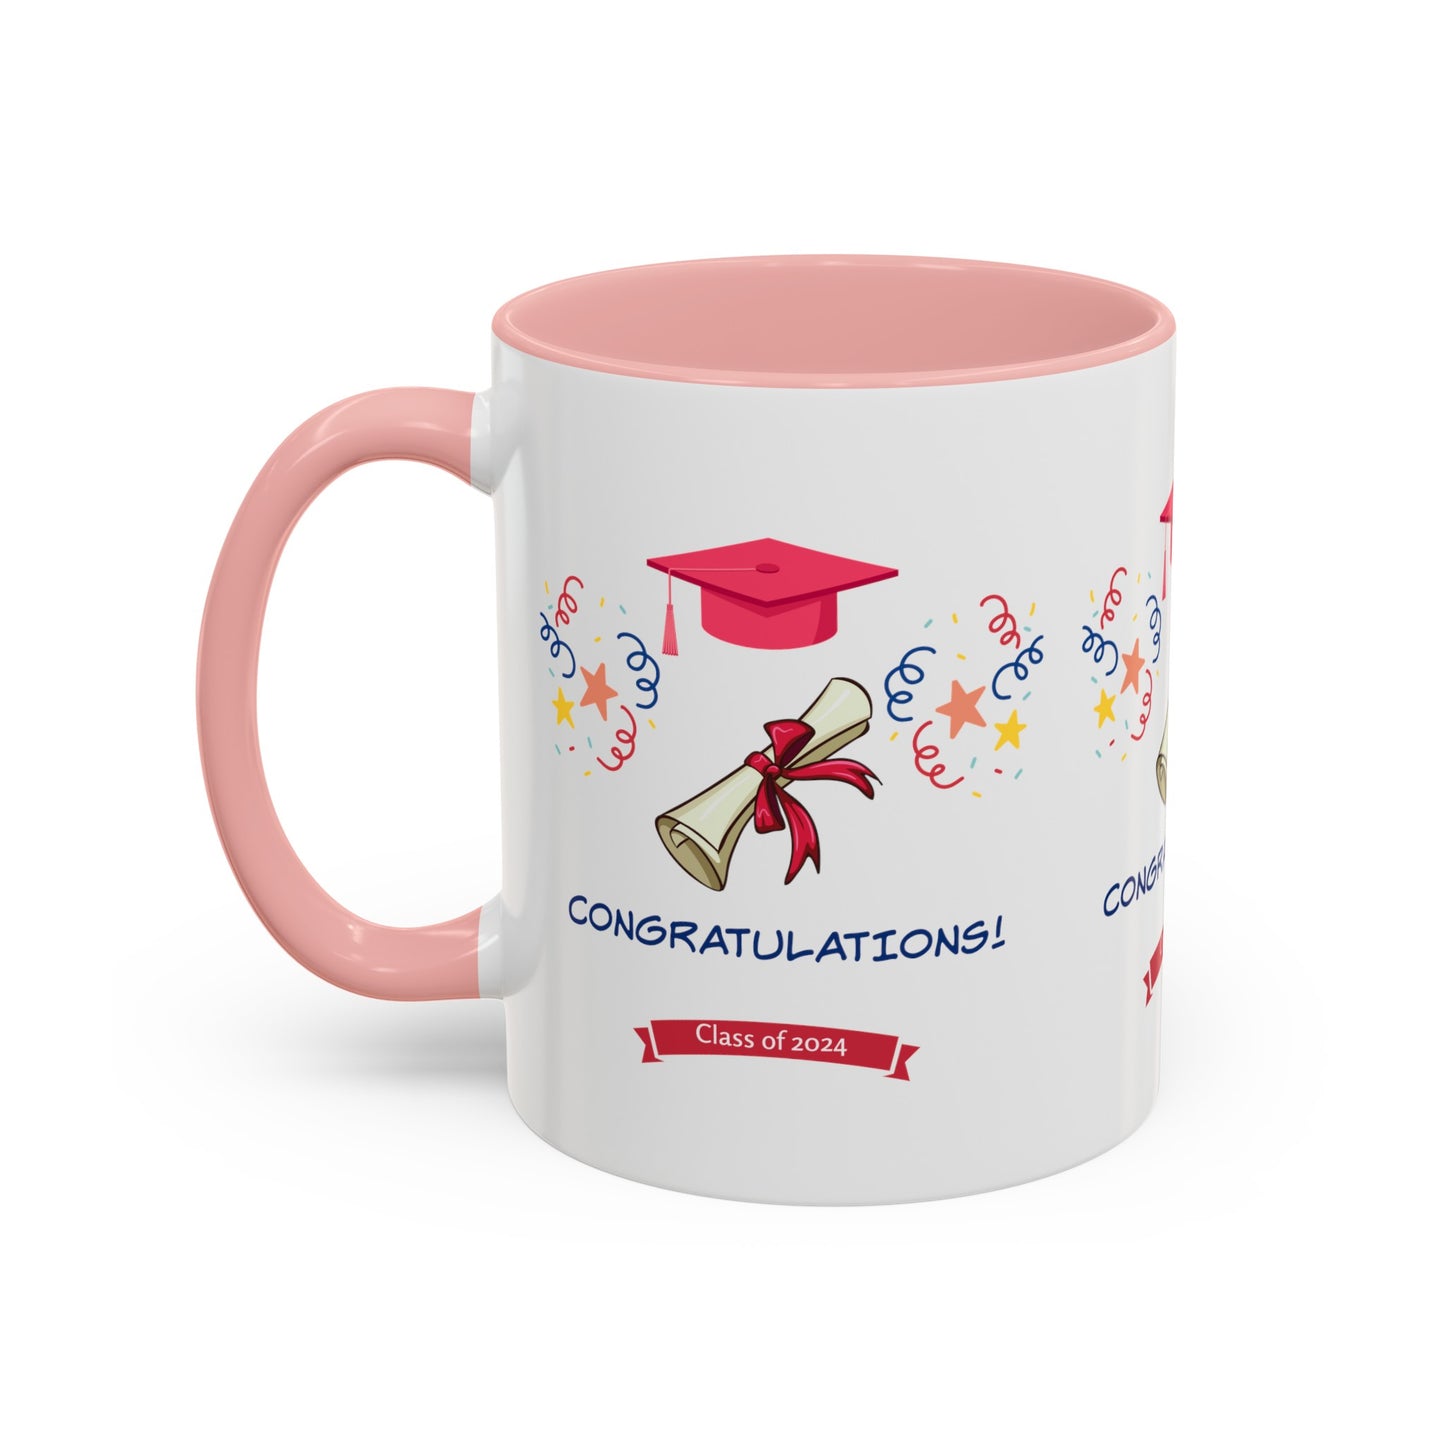 This American-made Printify 2024 Congratulations Mug: Graduation; 11 oz.; 2 Colors features a pink handle and interior, along with a lively "Congratulations Class of 2024" design. Adorned with a graduation cap, diploma, and confetti graphics, this custom mug is perfect for celebrating your special milestone.